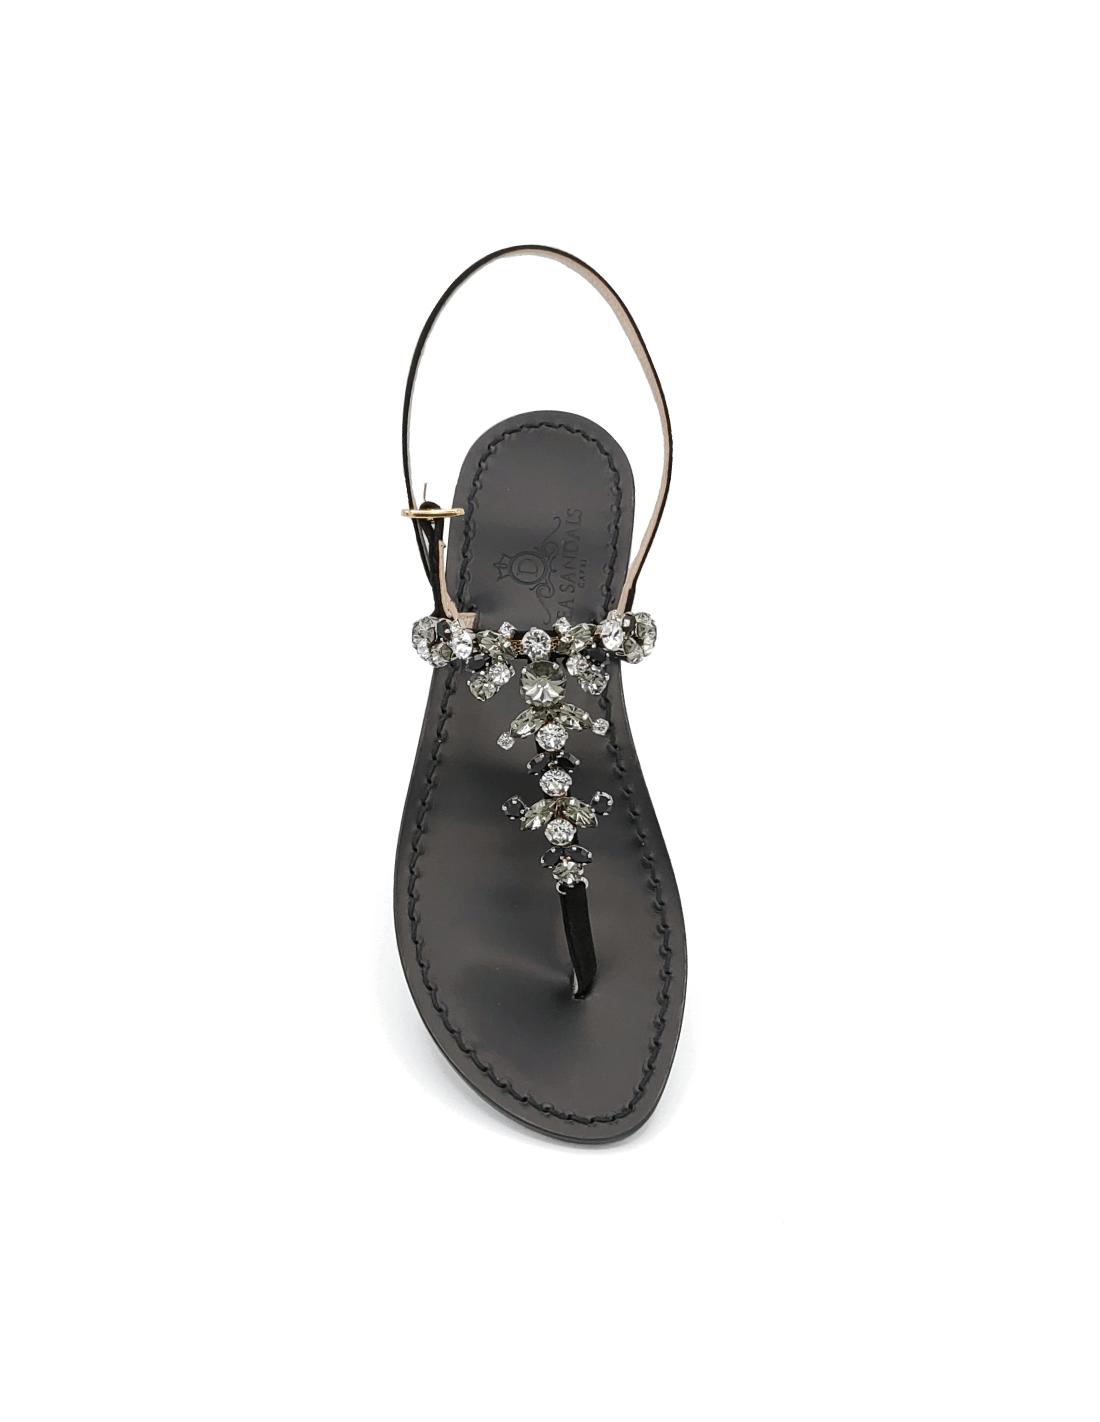 Scopolo jewel thong sandals black suede straps, black leather sole